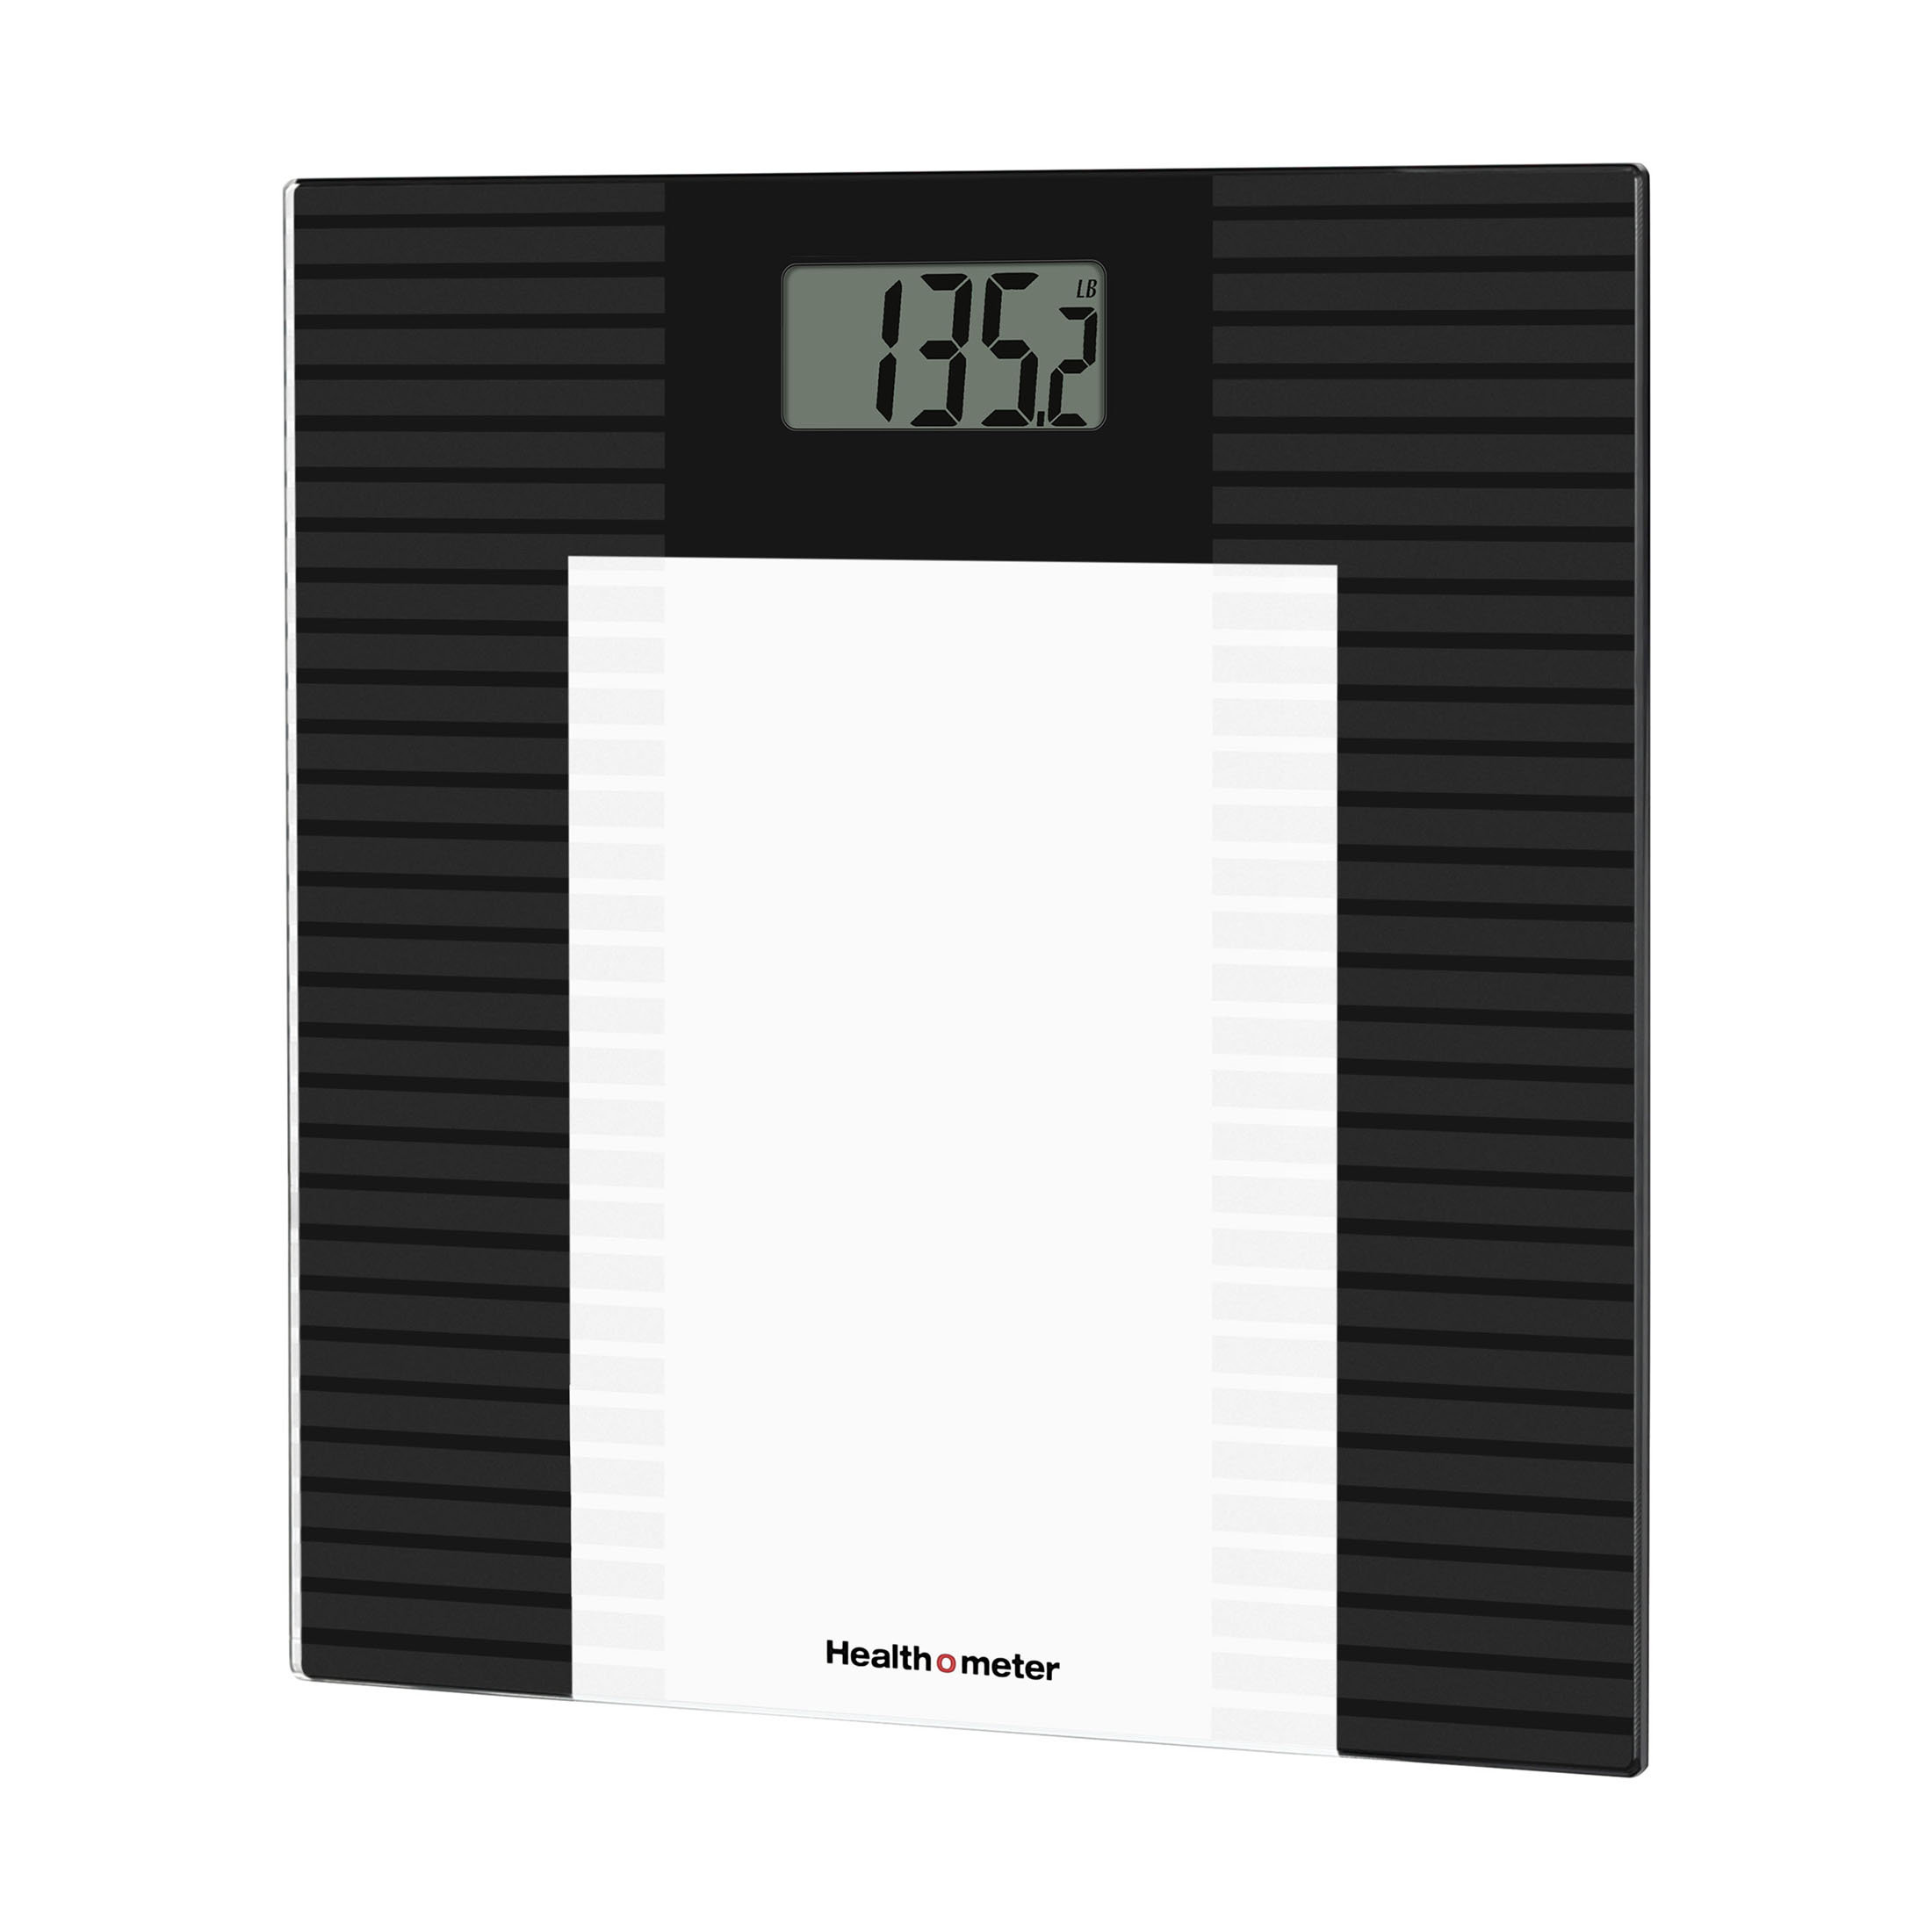 Accu-Measure Digital Scale - Accurate and Precise - Bathroom and Home Scale  - Track Your Progress - Easy to Store - Up to 400 Pounds